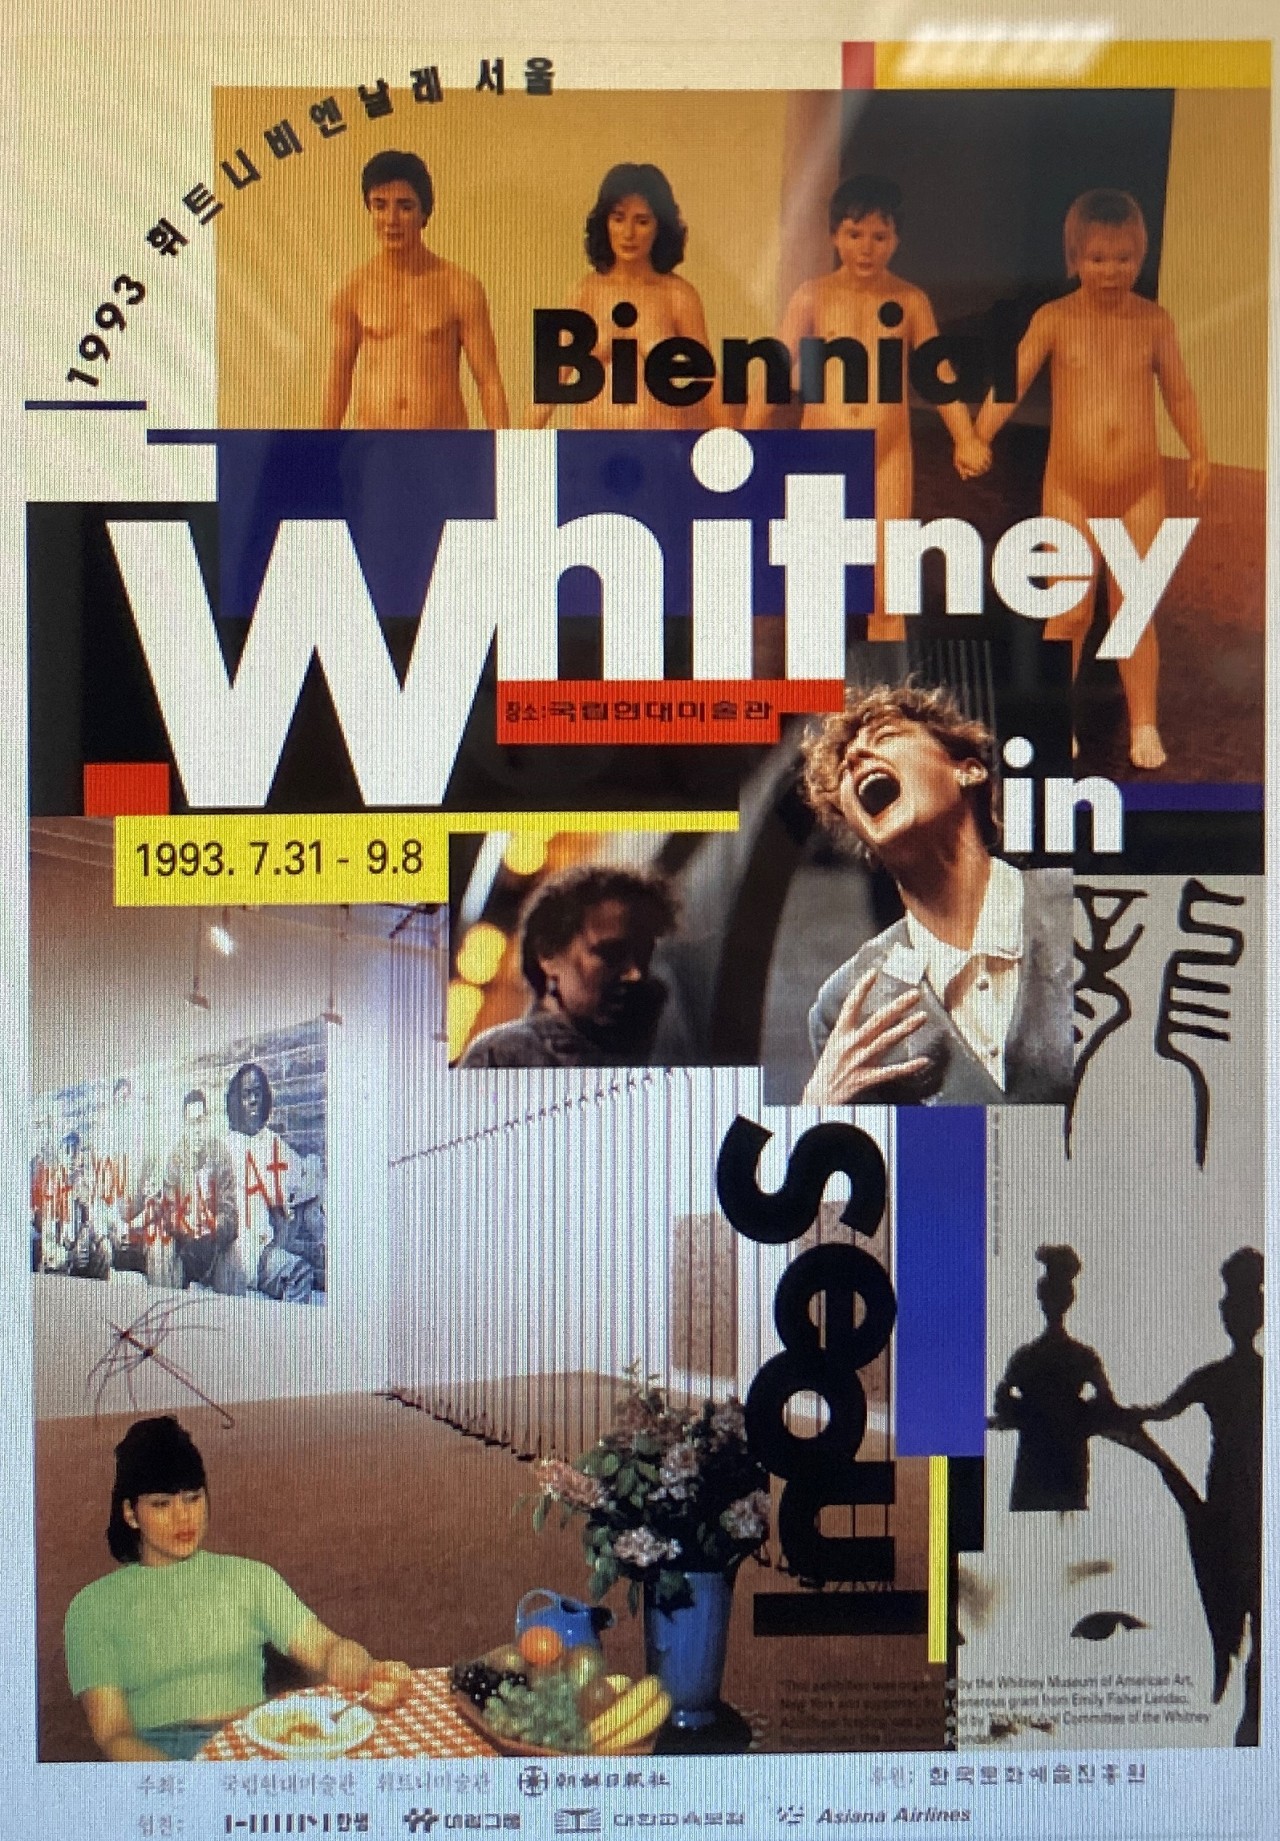 A poster of “1993 Whiteny Biennale in Seoul” will be shown as part of the exhibition “Paik Nam June Effect” scheduled in November (MMCA)